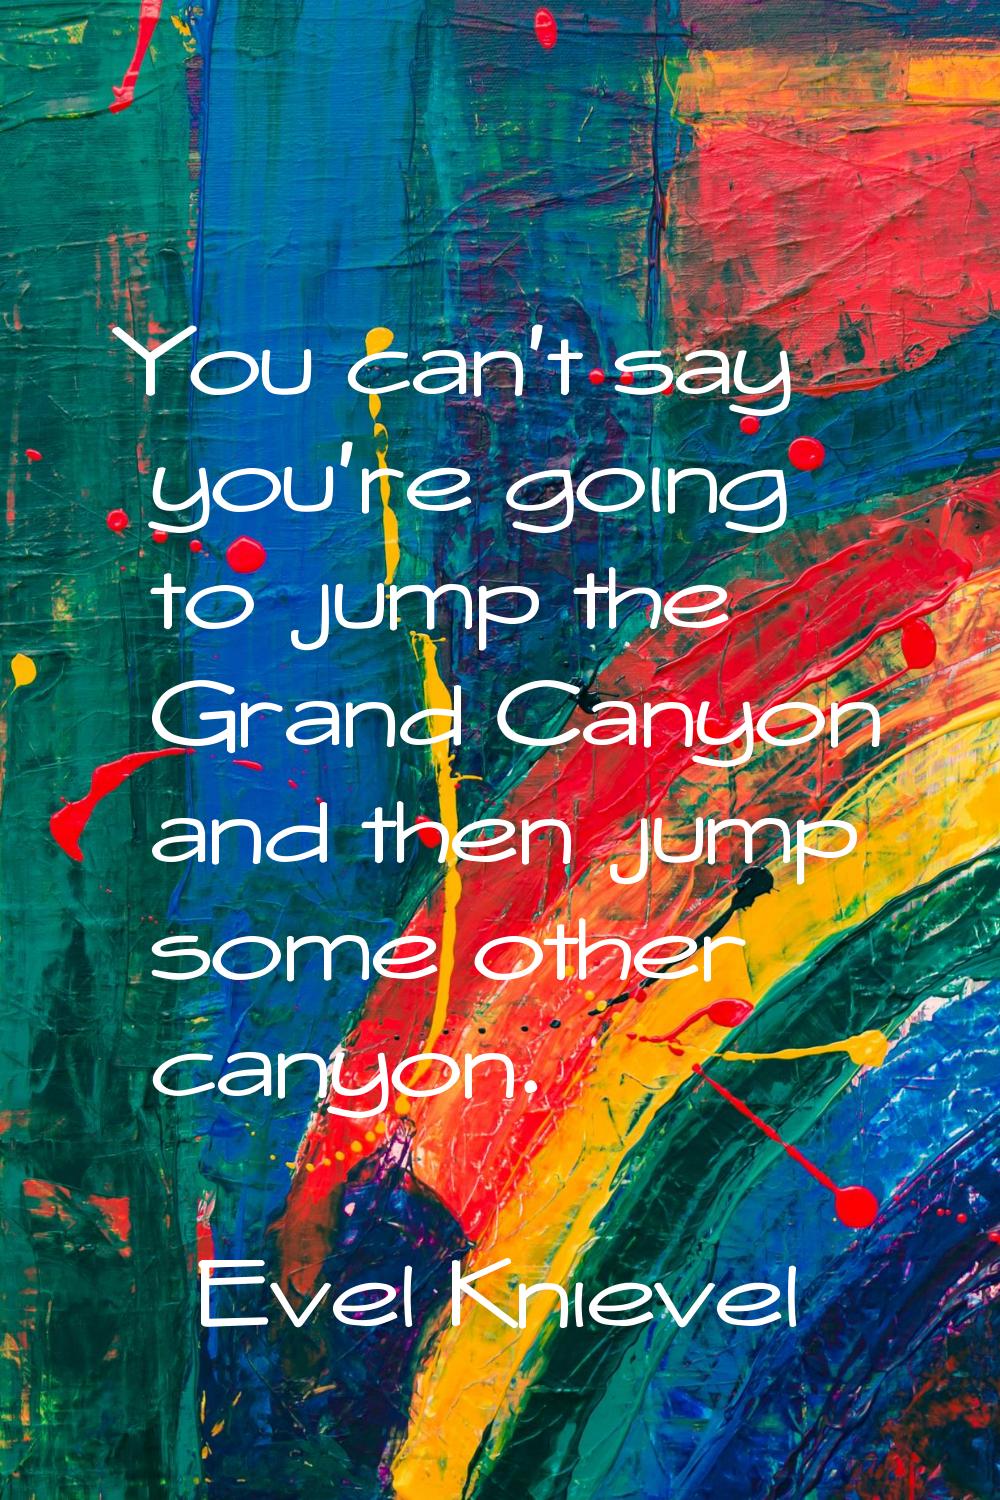 You can't say you're going to jump the Grand Canyon and then jump some other canyon.